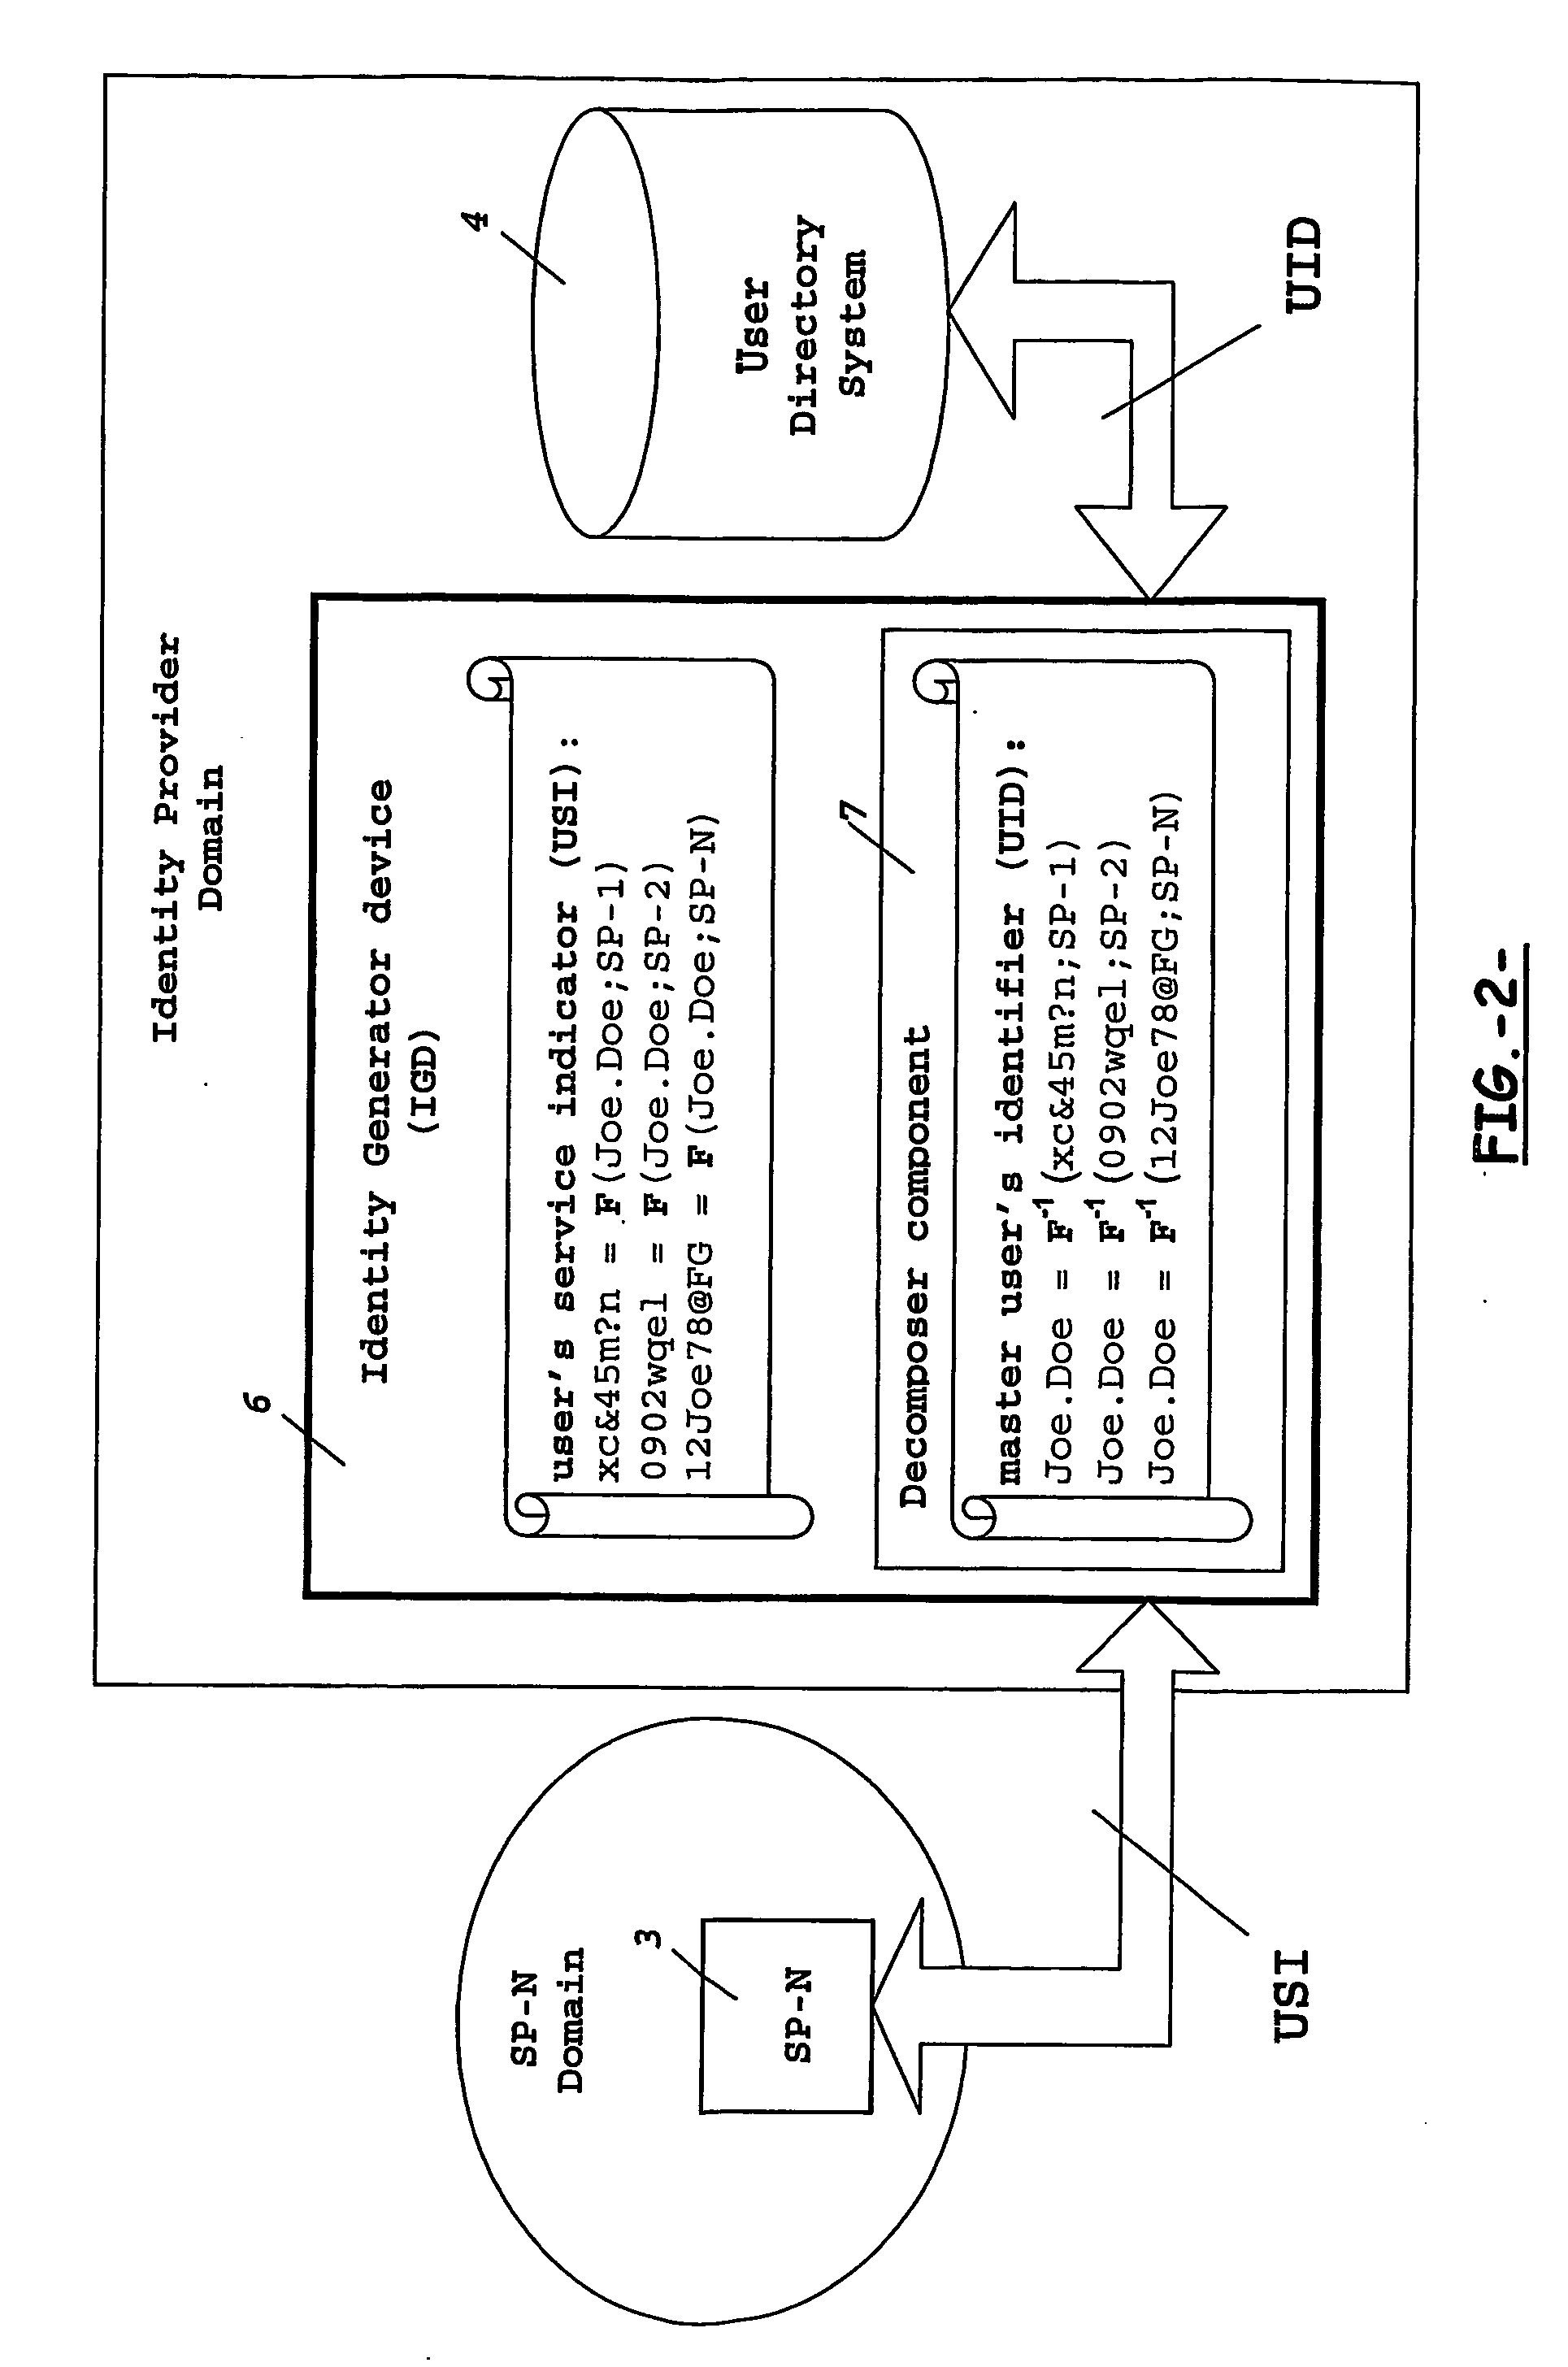 Means and method for generating a unique user's identity for use between different domains